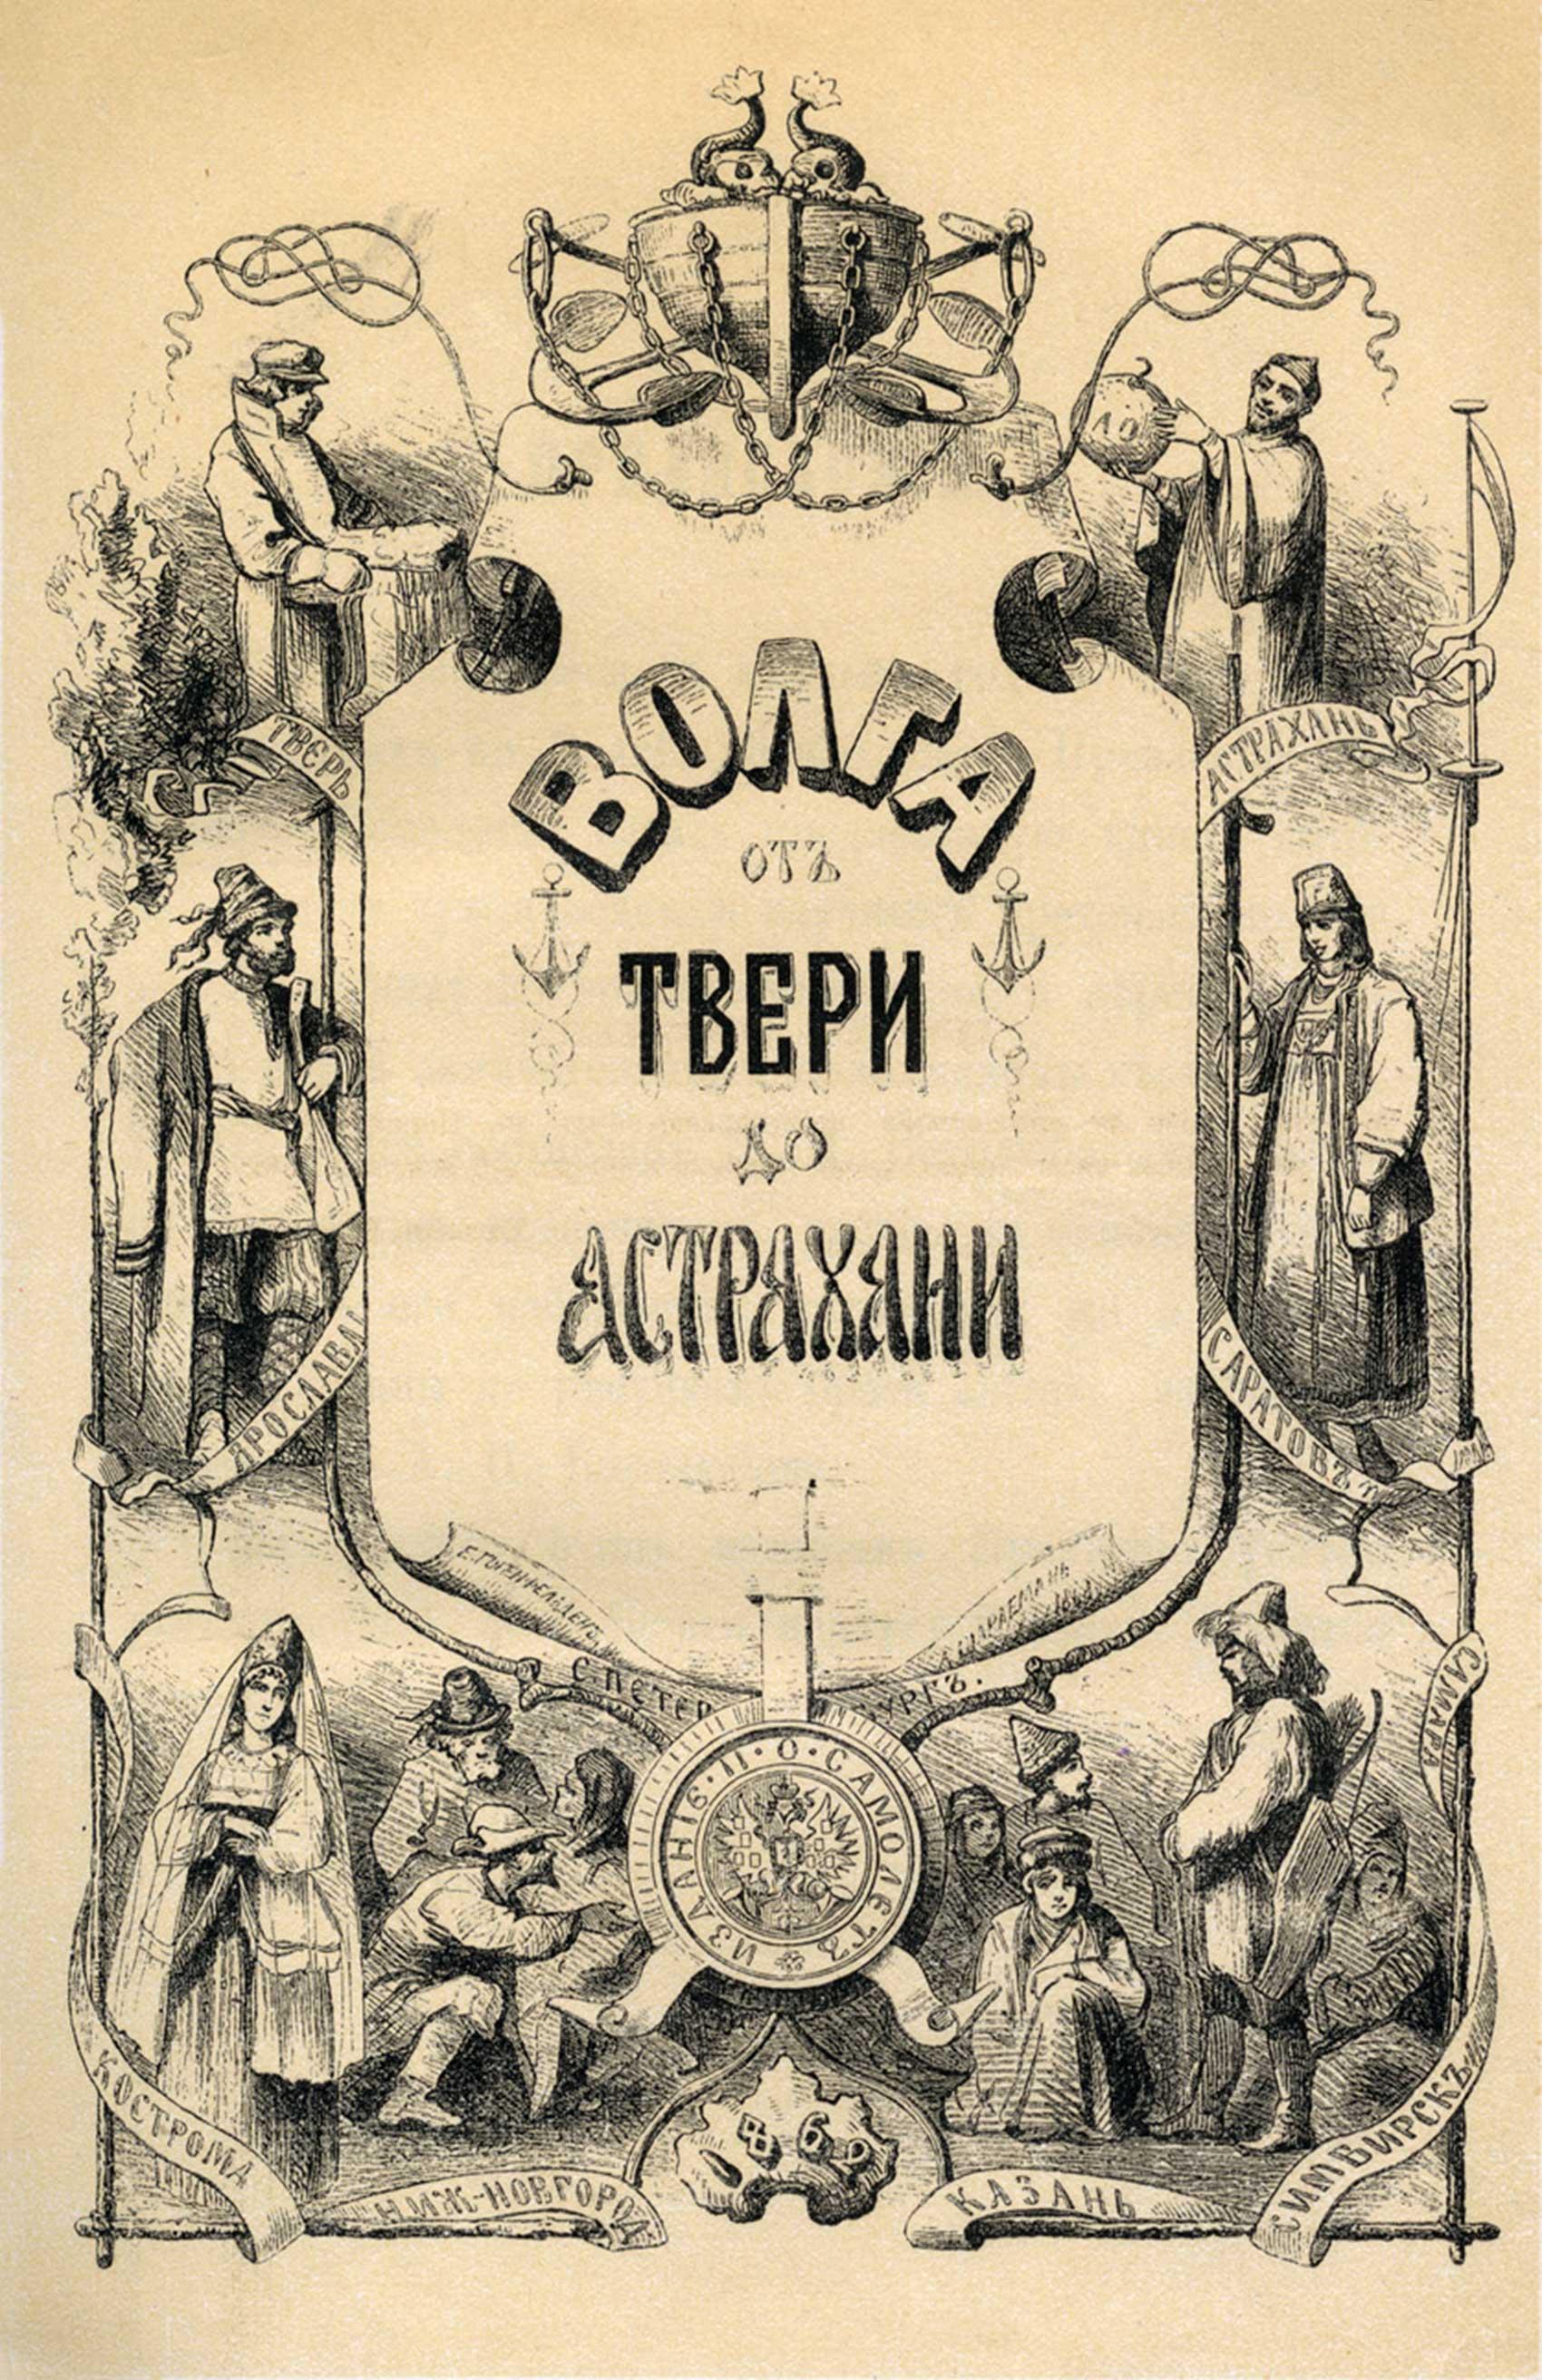 Frontispiece in Russian: Volga from Tver to Astrakhan